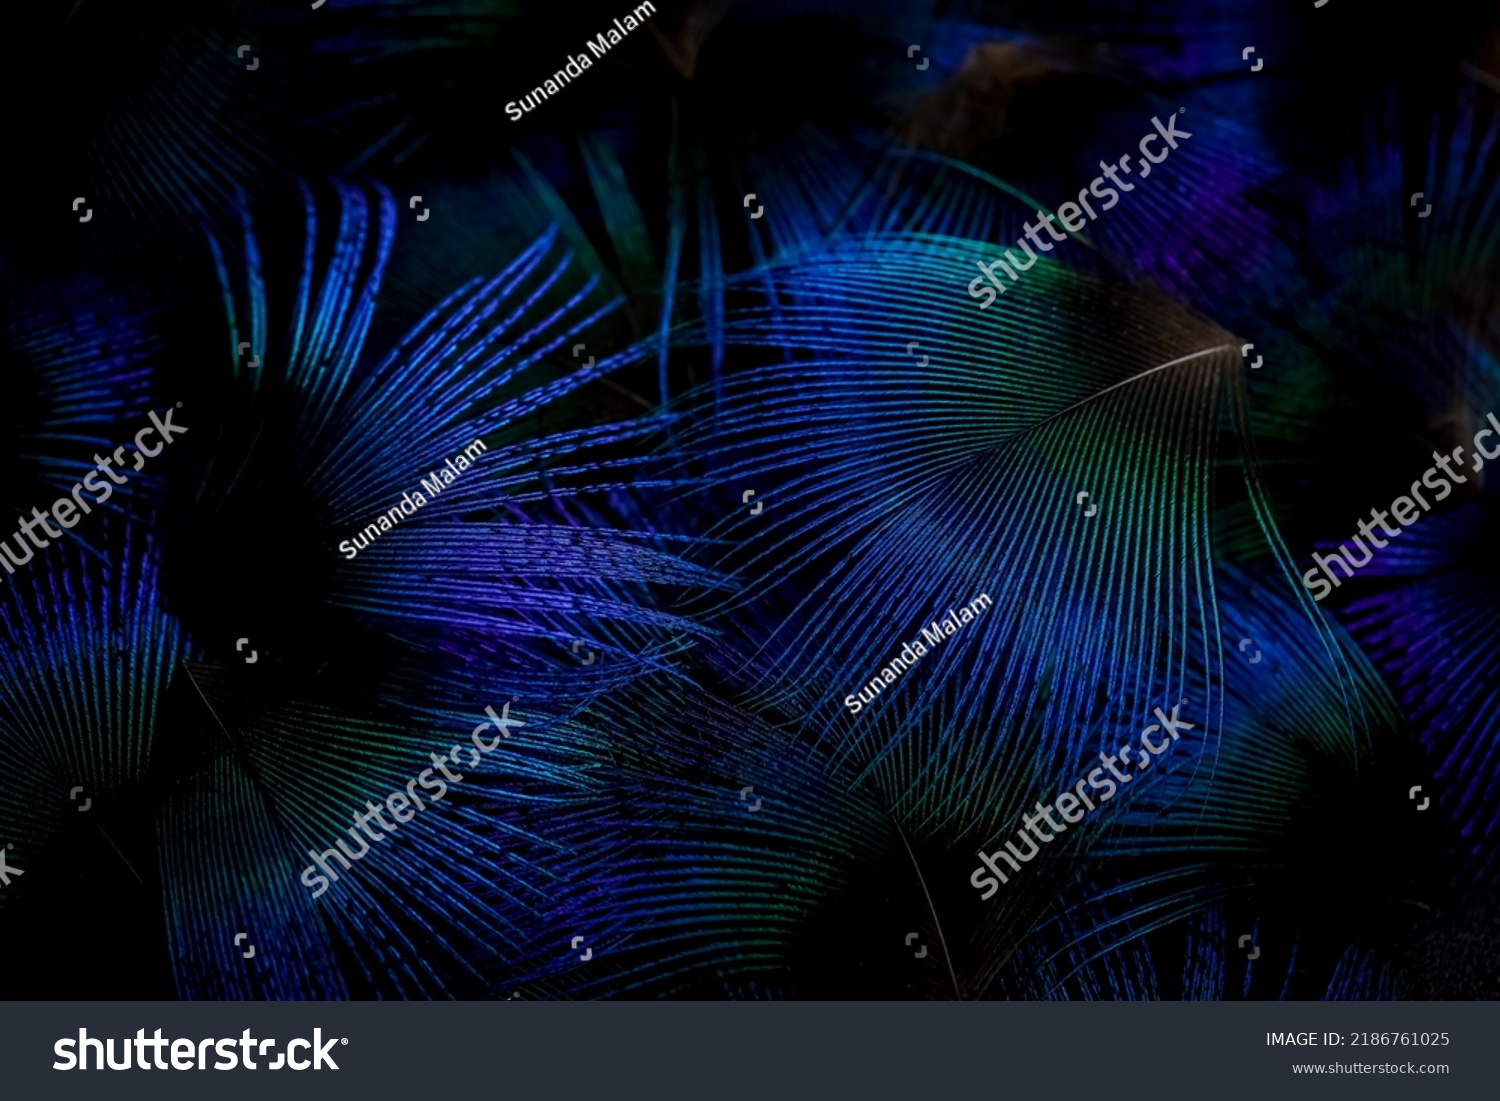 India, 5 August, 2022 : Feather background. #2186761025